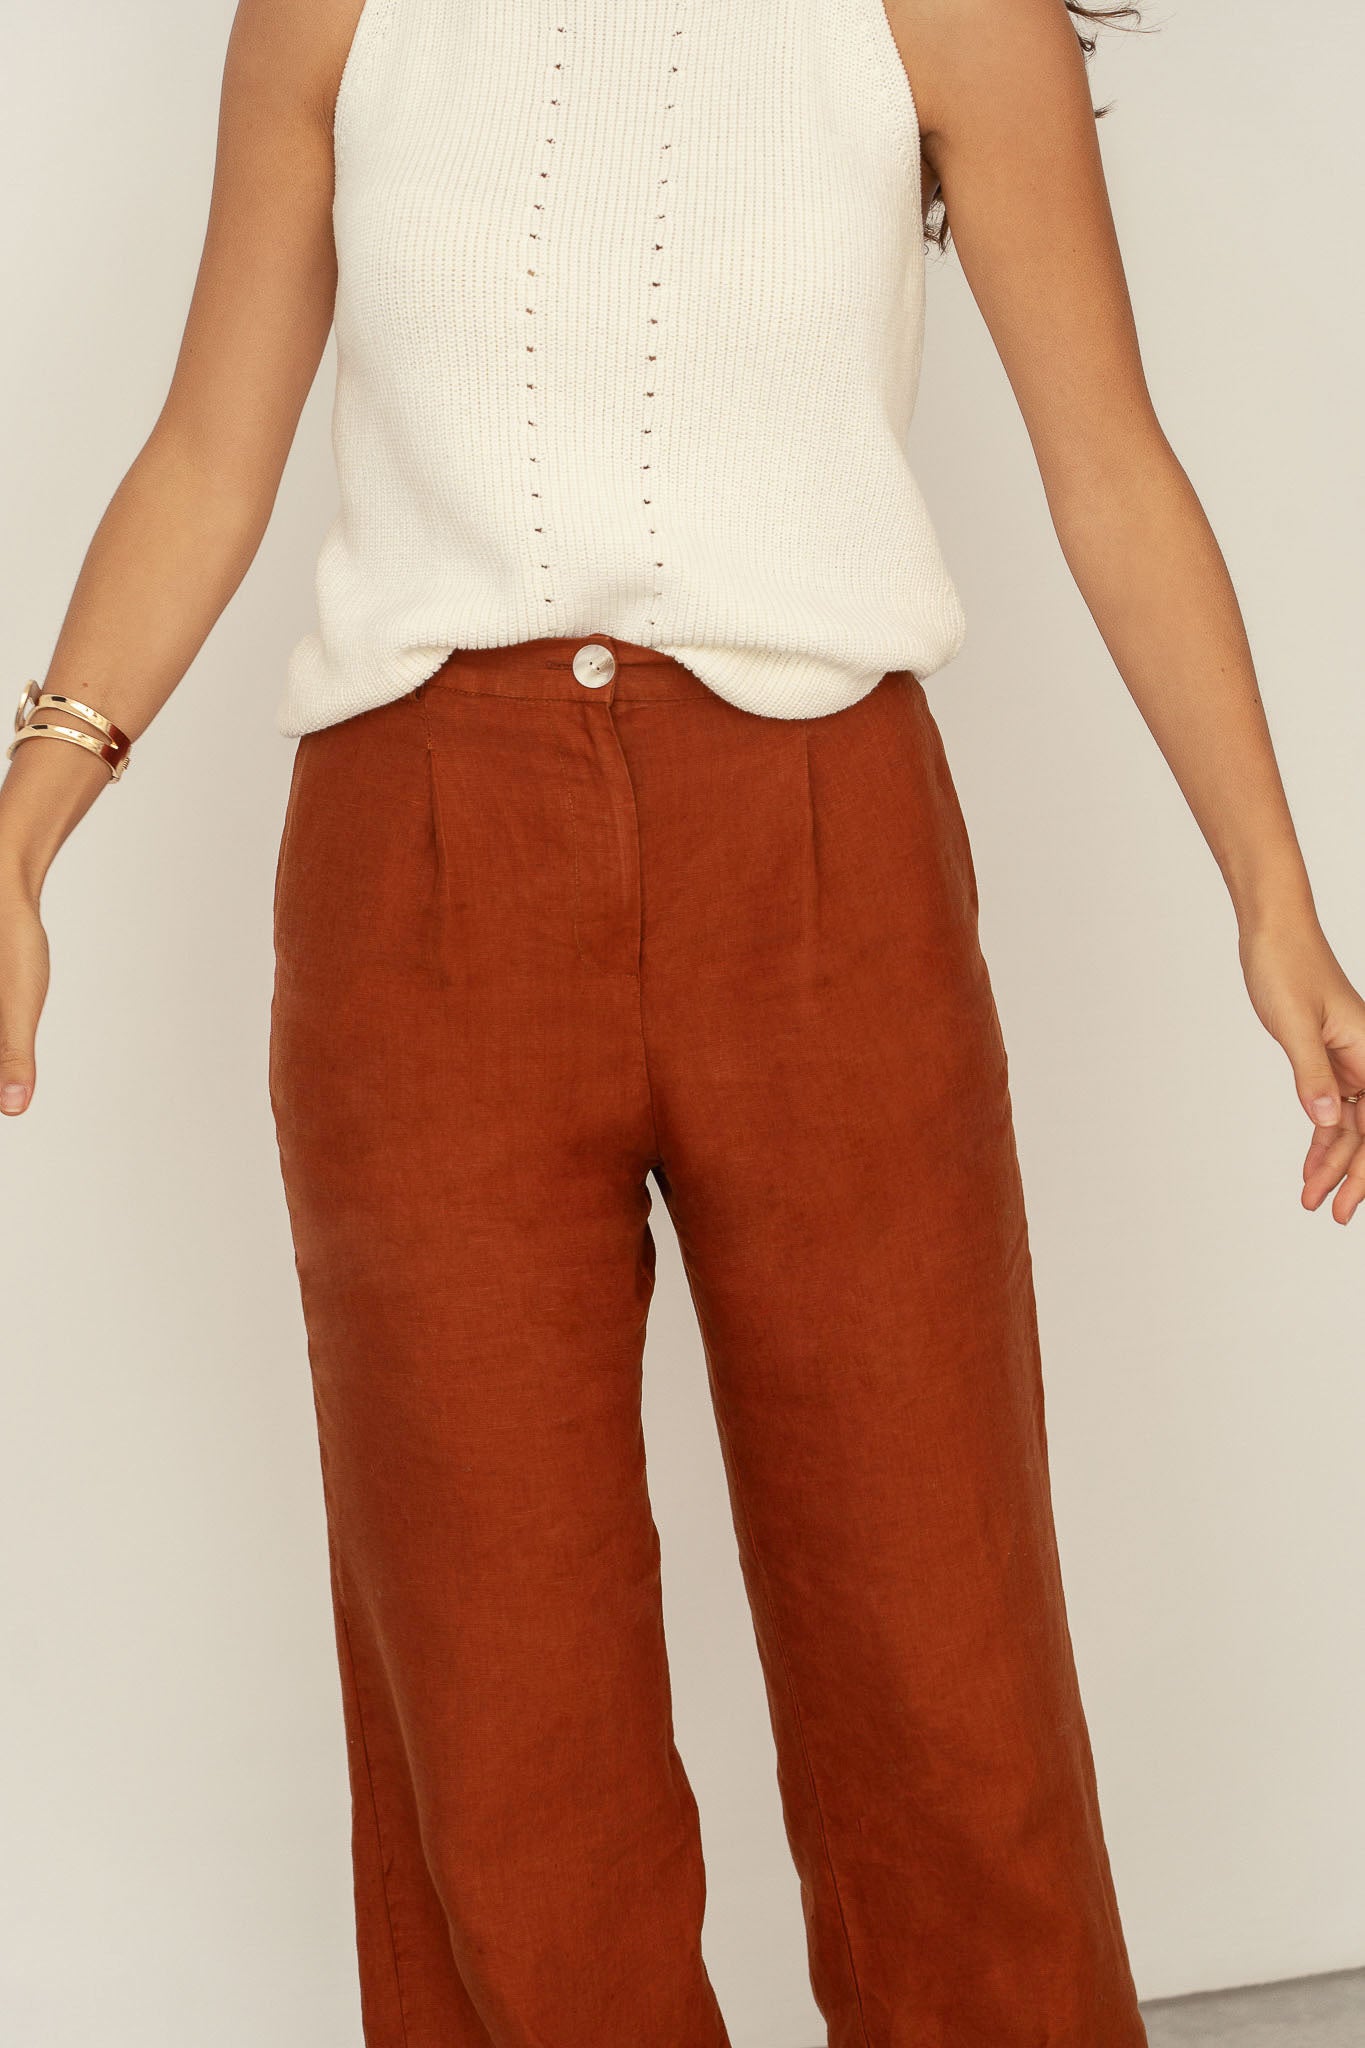 Naz women's linen pants in rust. Made in Portugal with sustainable fabrics with lasting quality. 